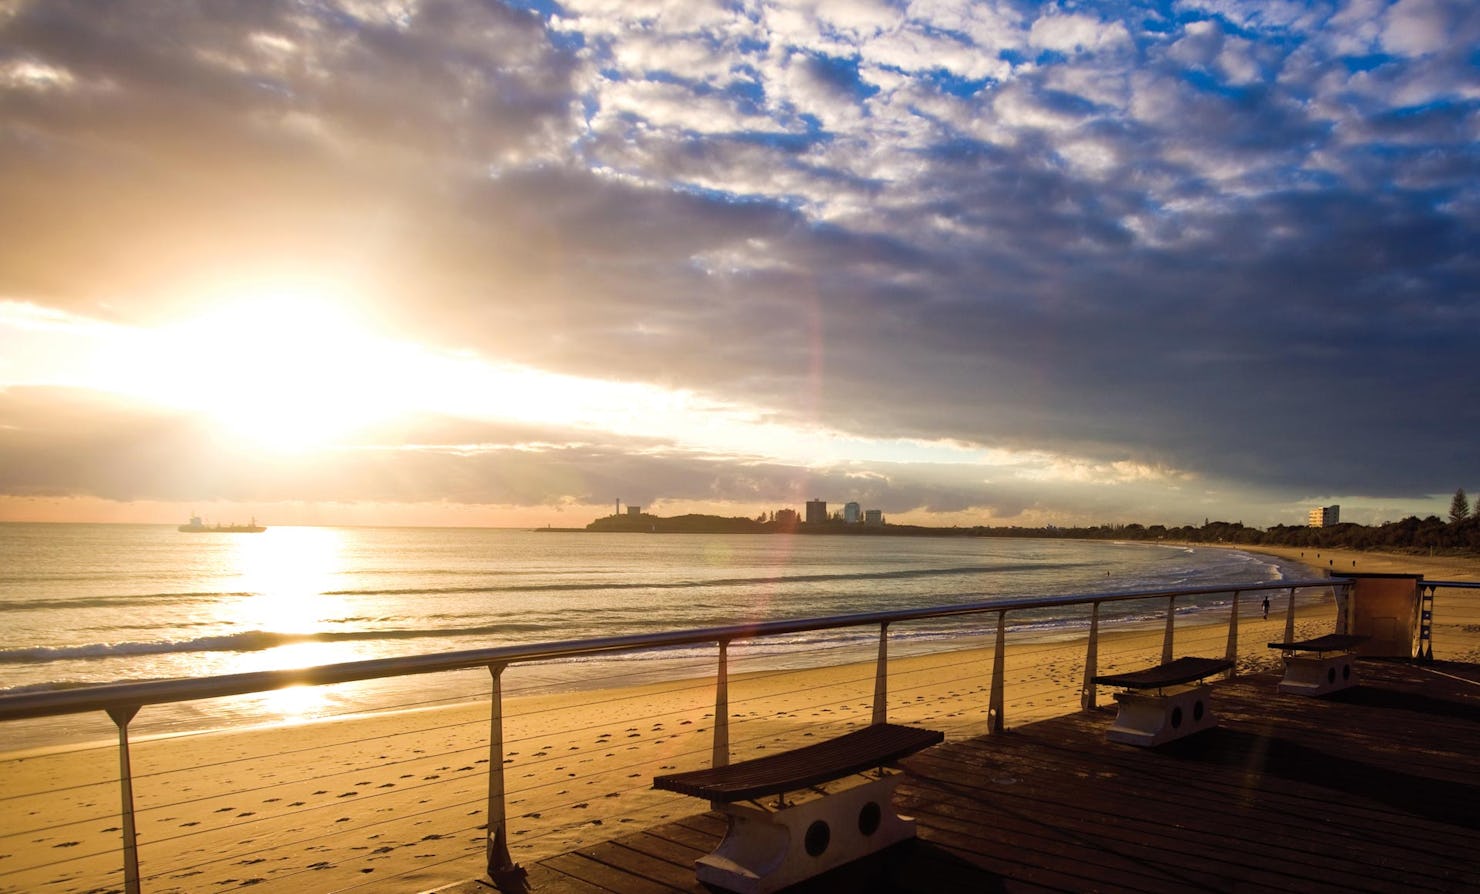 Things to do on your Mooloolaba beach break